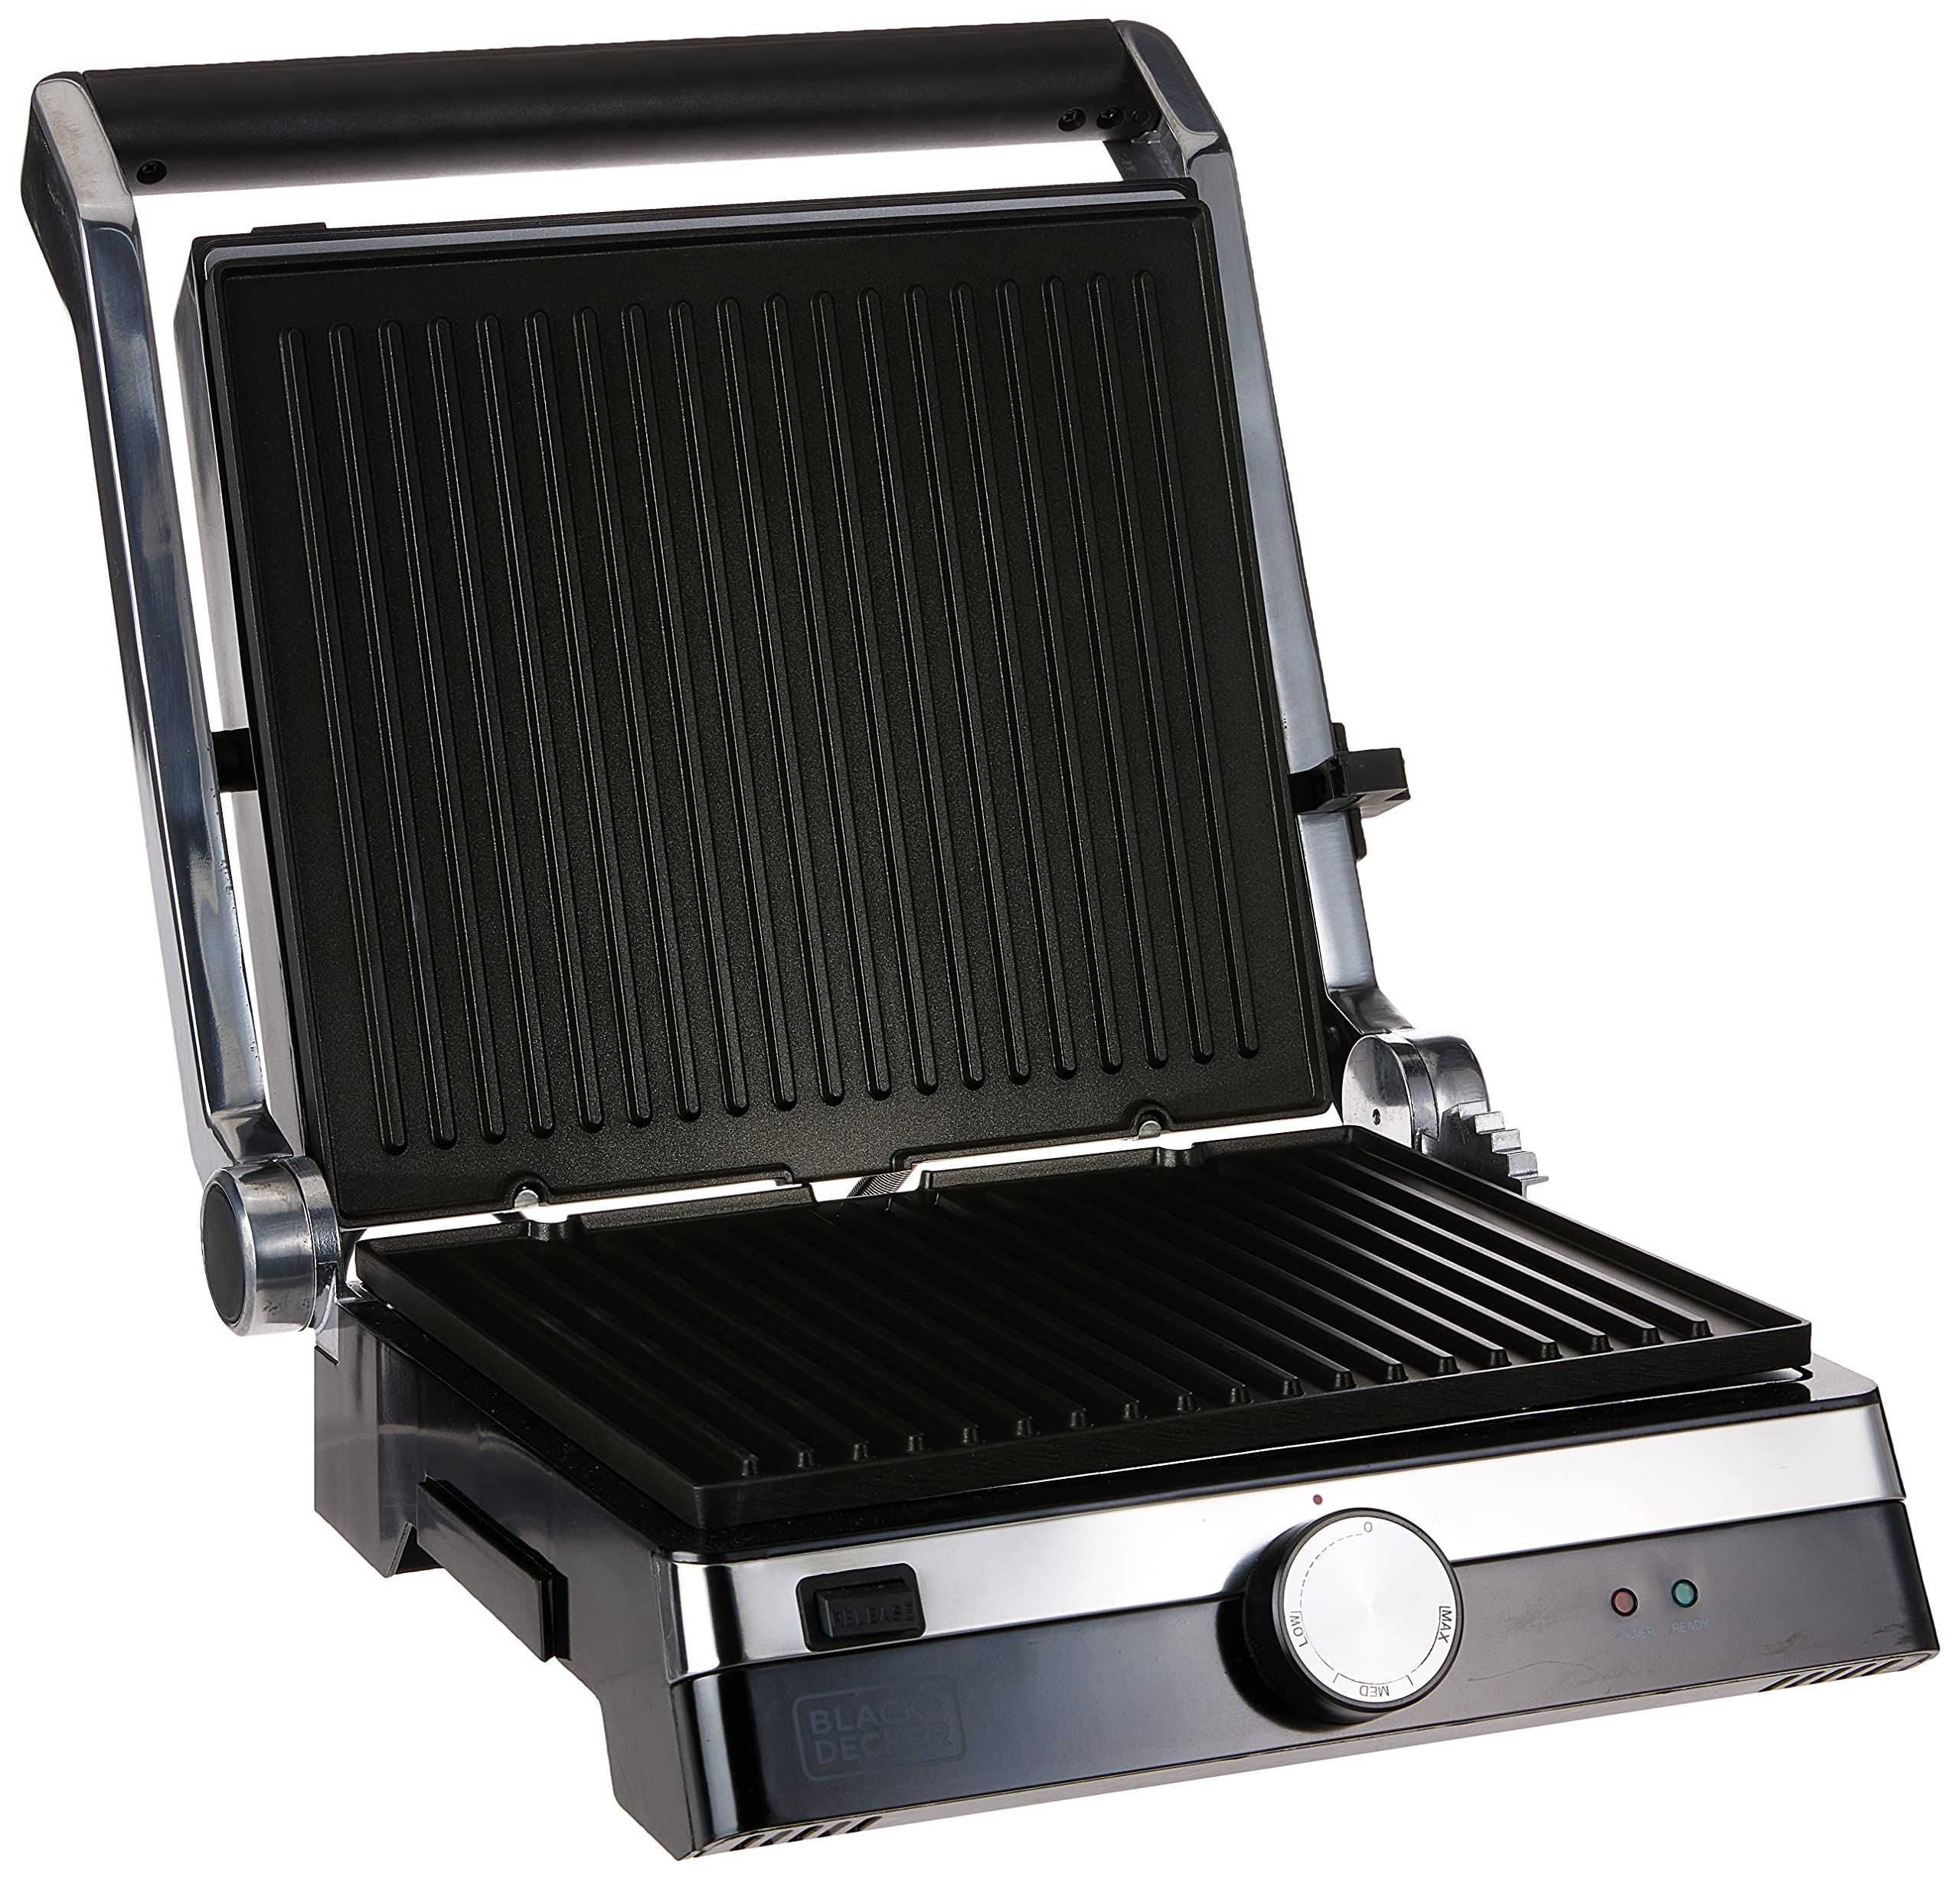 BLACK+DECKER Family Health Grill, 2000W, 1500 cm² Double Grilling, Non-Stick & 180° Full Flat Grill, Temperature Control, 5 Adjustable Heights, Die Cast Aluminium Plates, , CG2000-B5